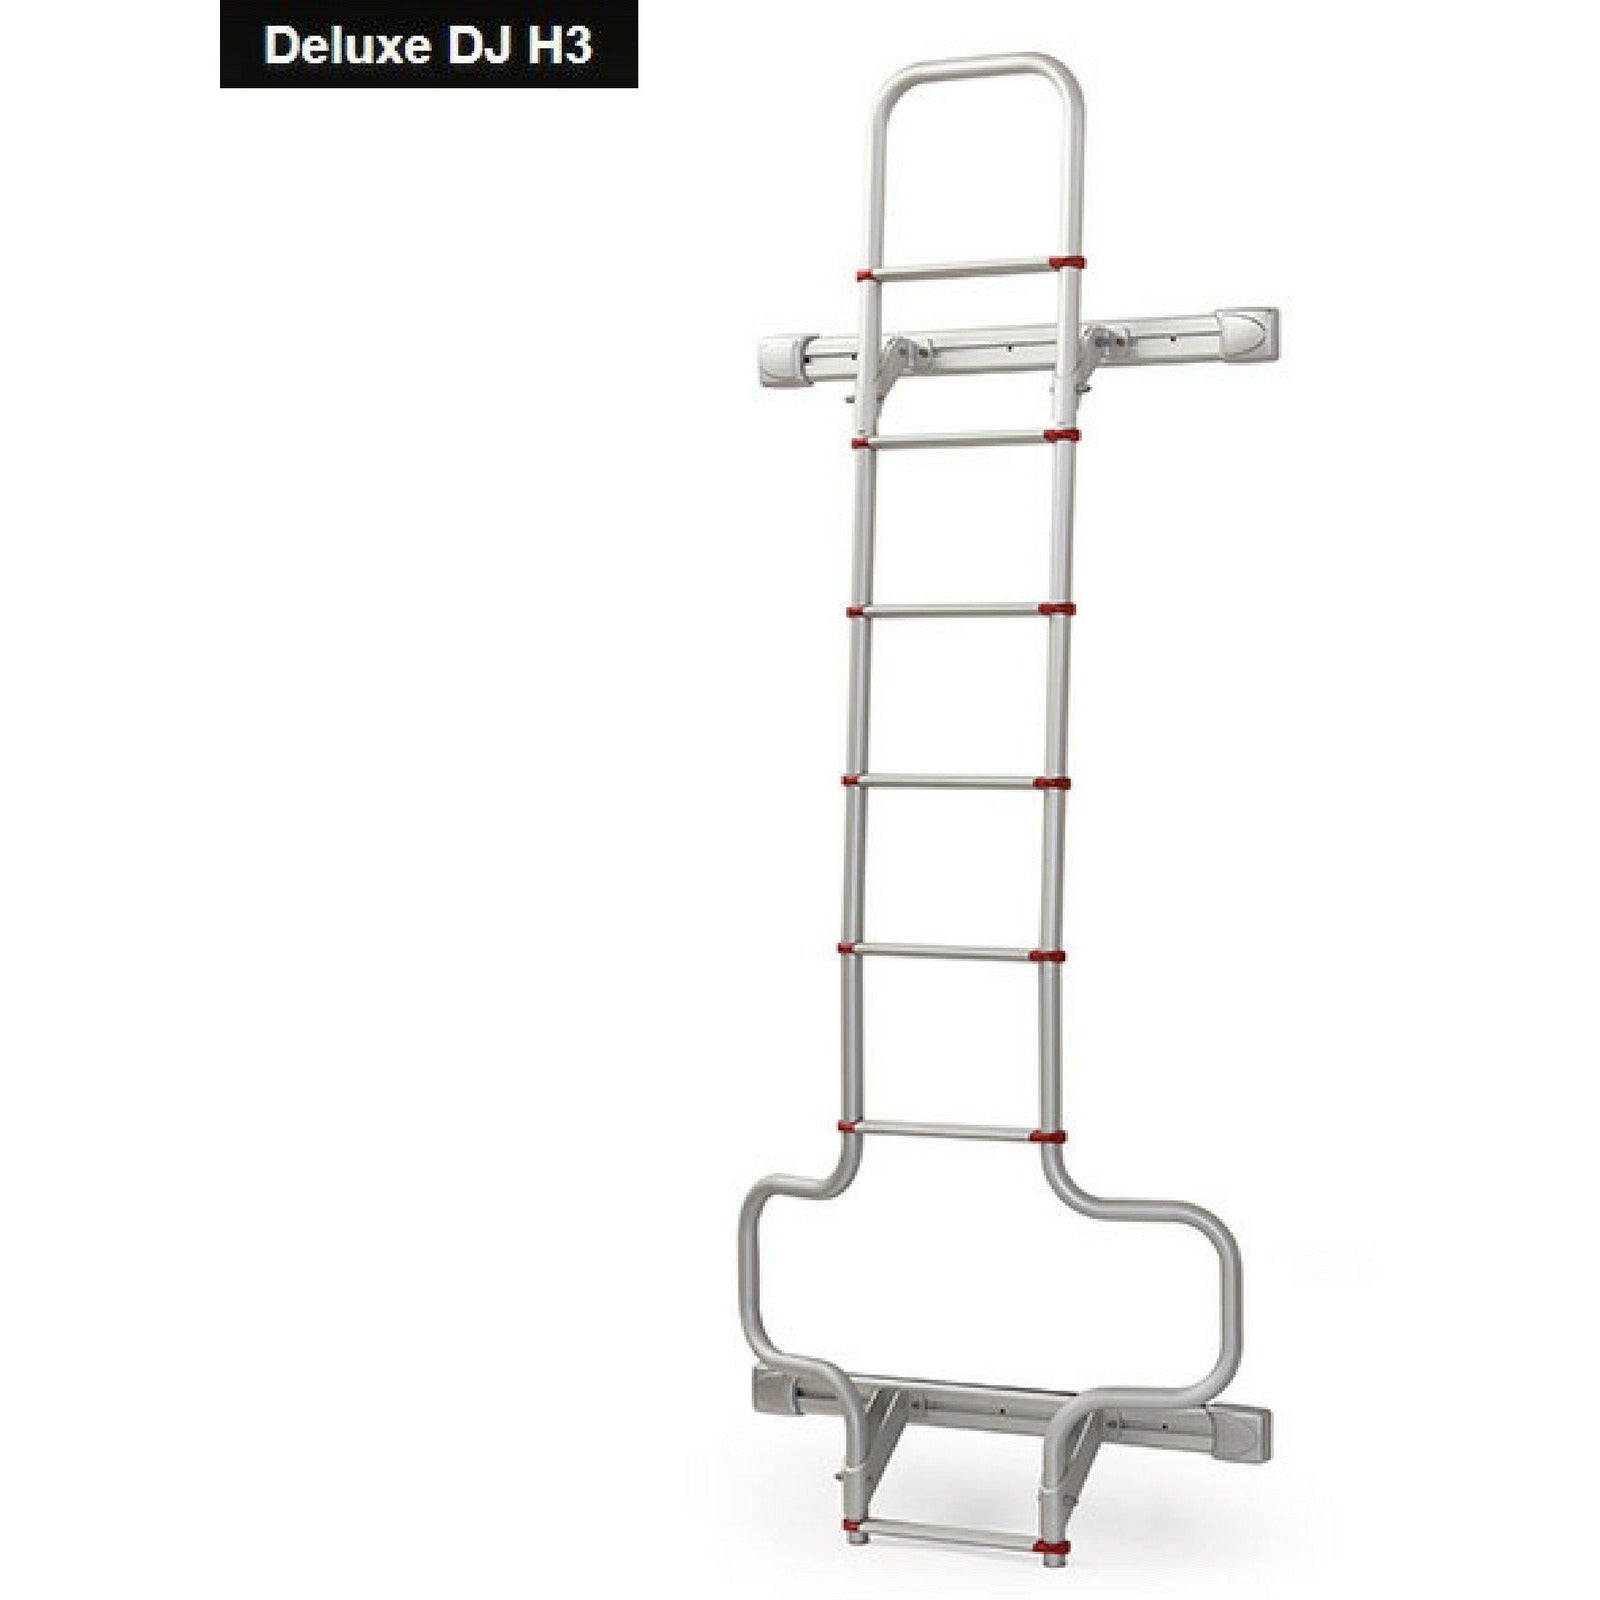 Fiamma Deluxe DJ Van Ladder made by Fiamma. A Ladders sold by Quality Caravan Awnings